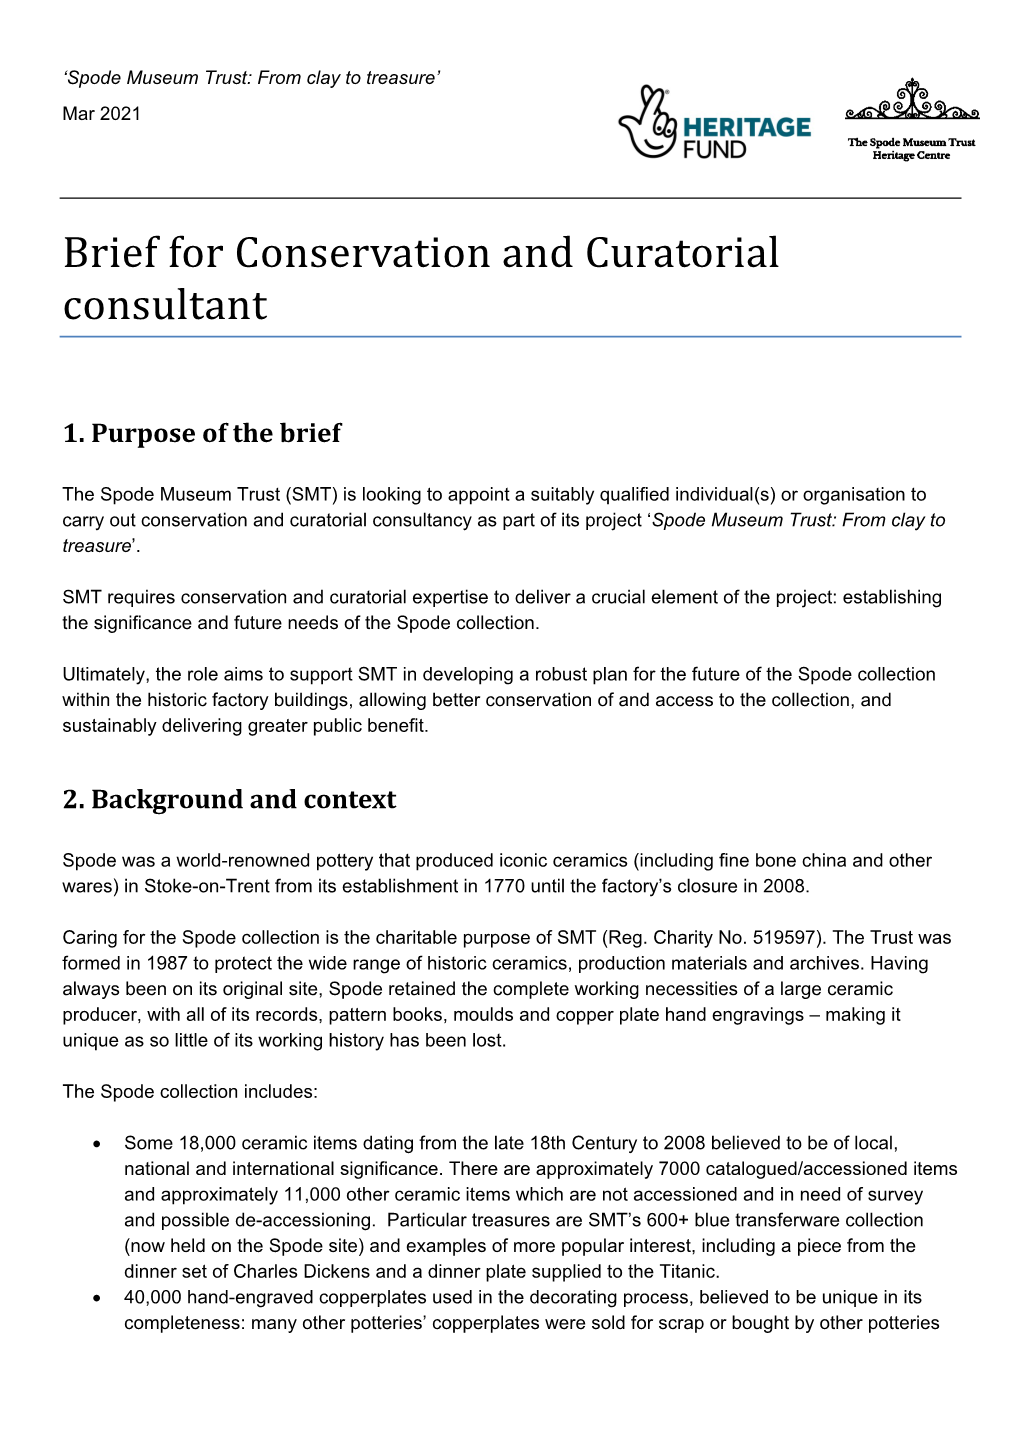 Brief for Conservation and Curatorial Consultant